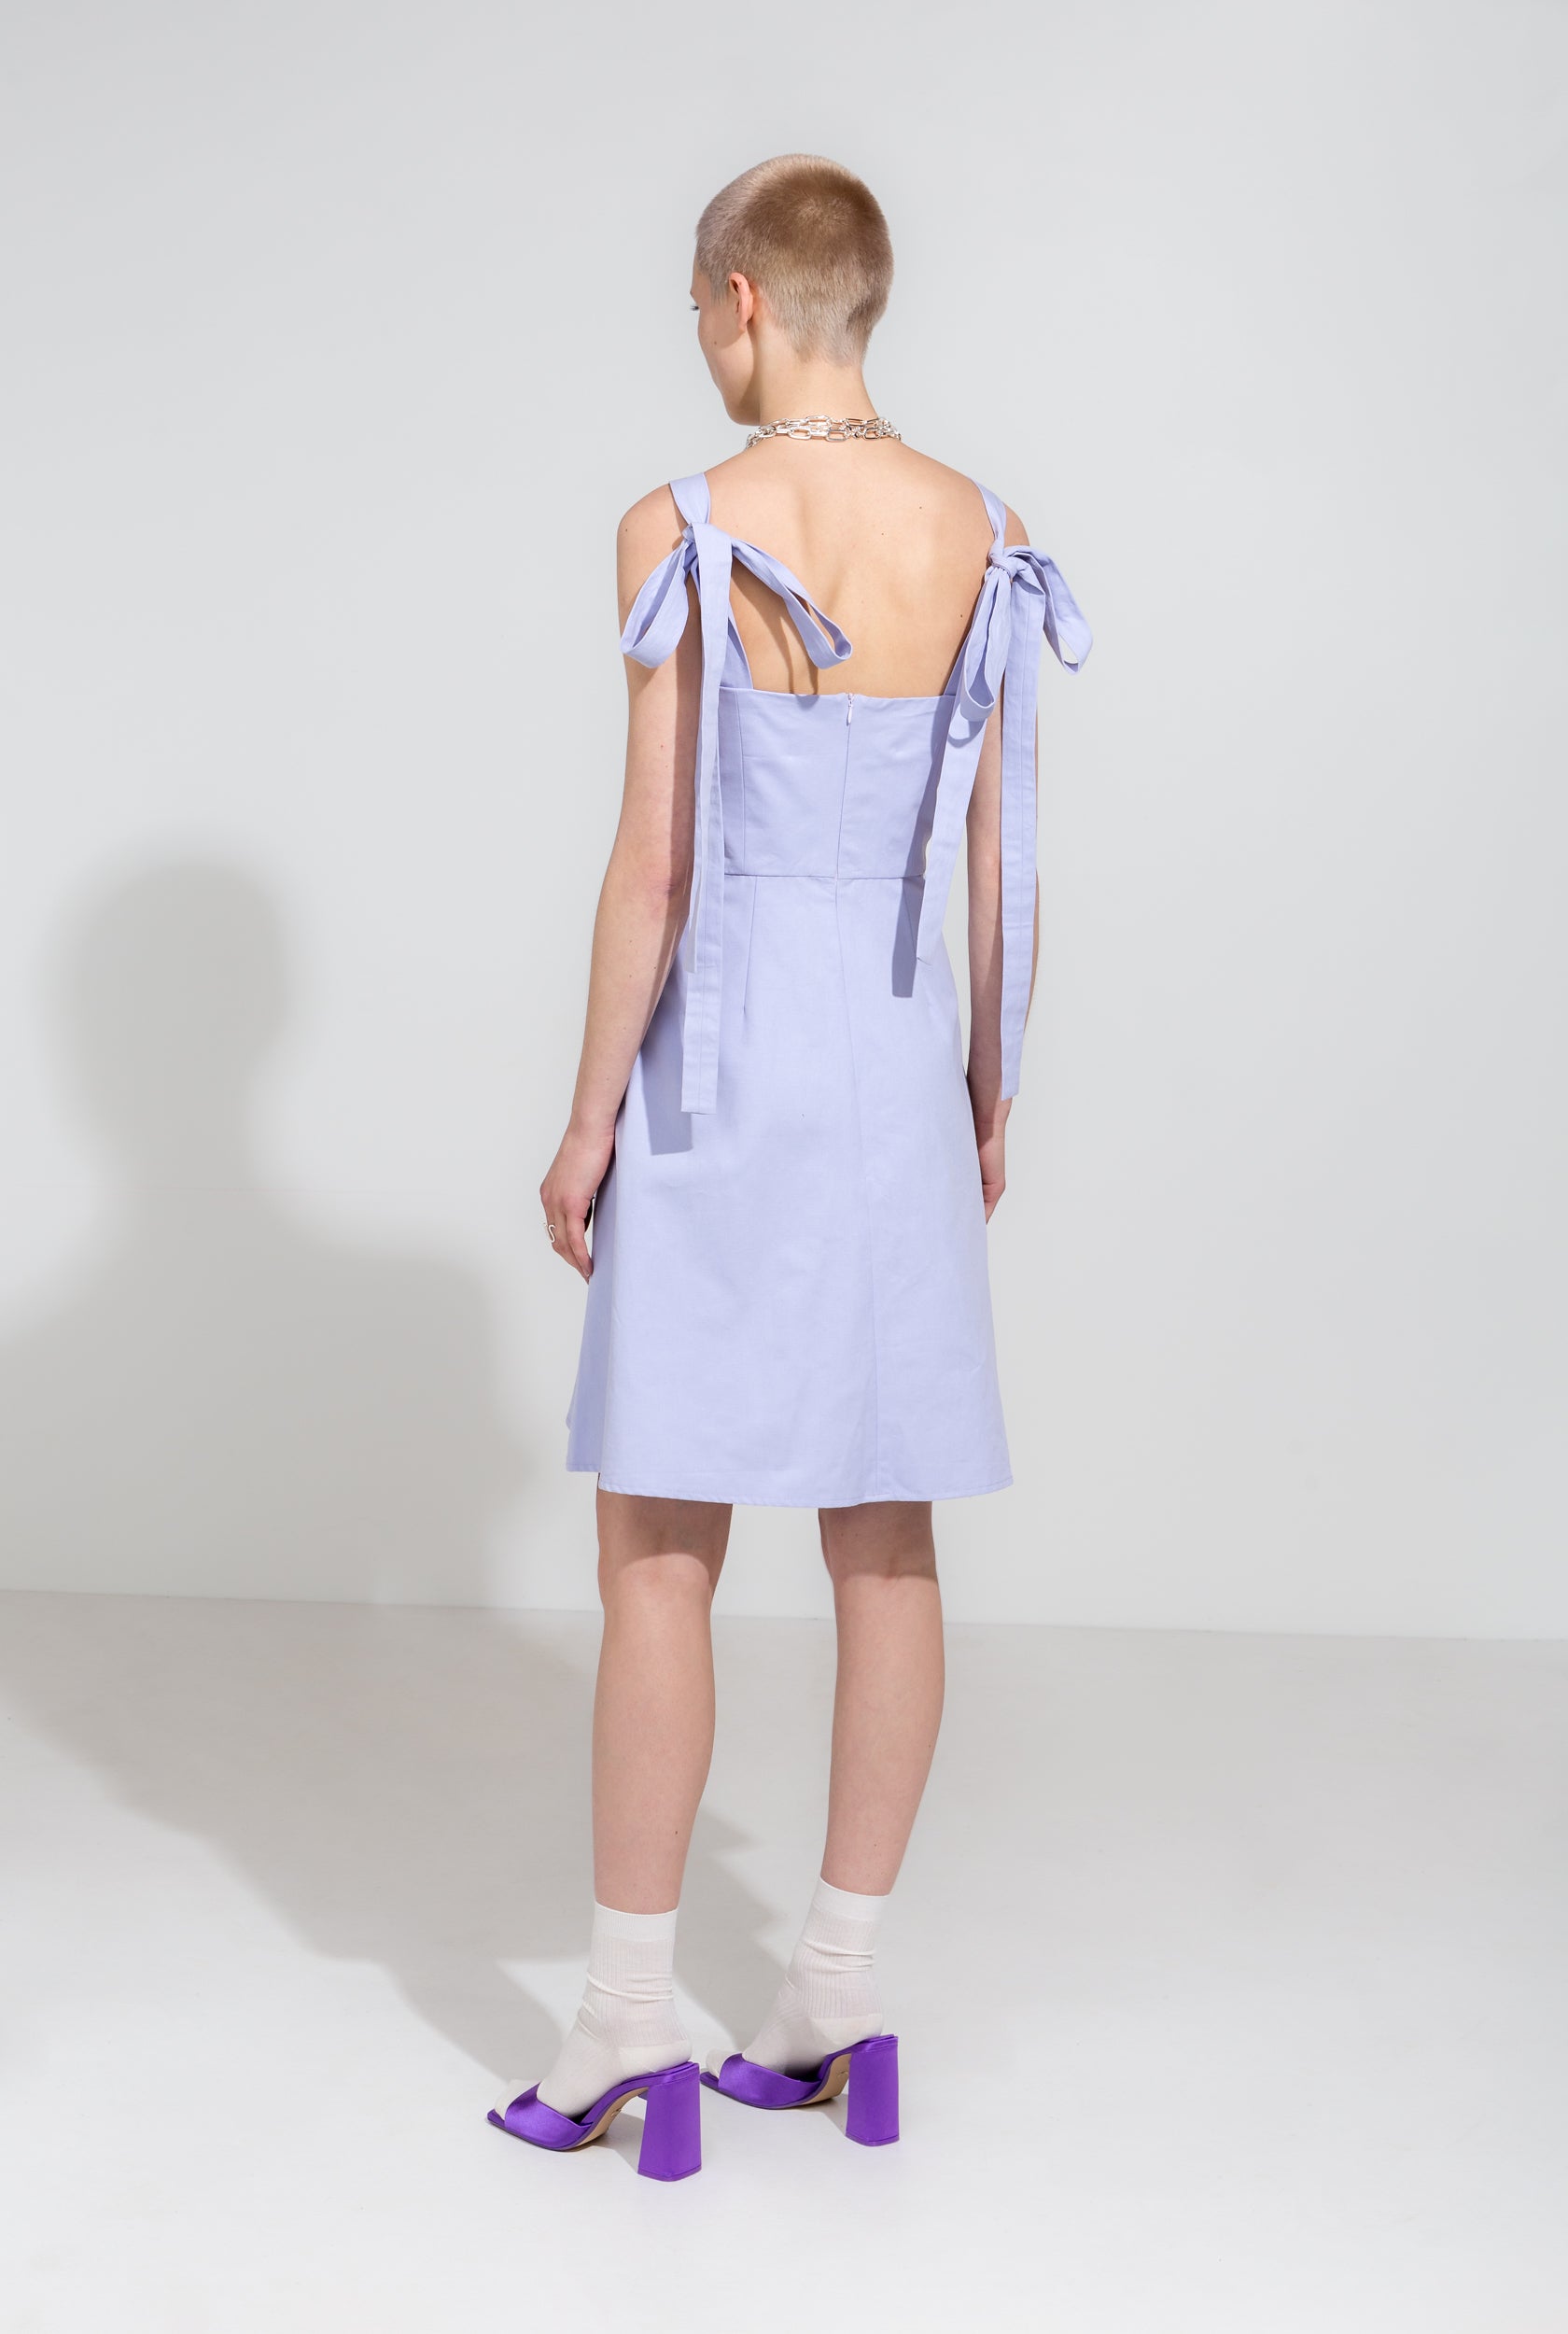 Icy lilac knee length dress with adjustable straps